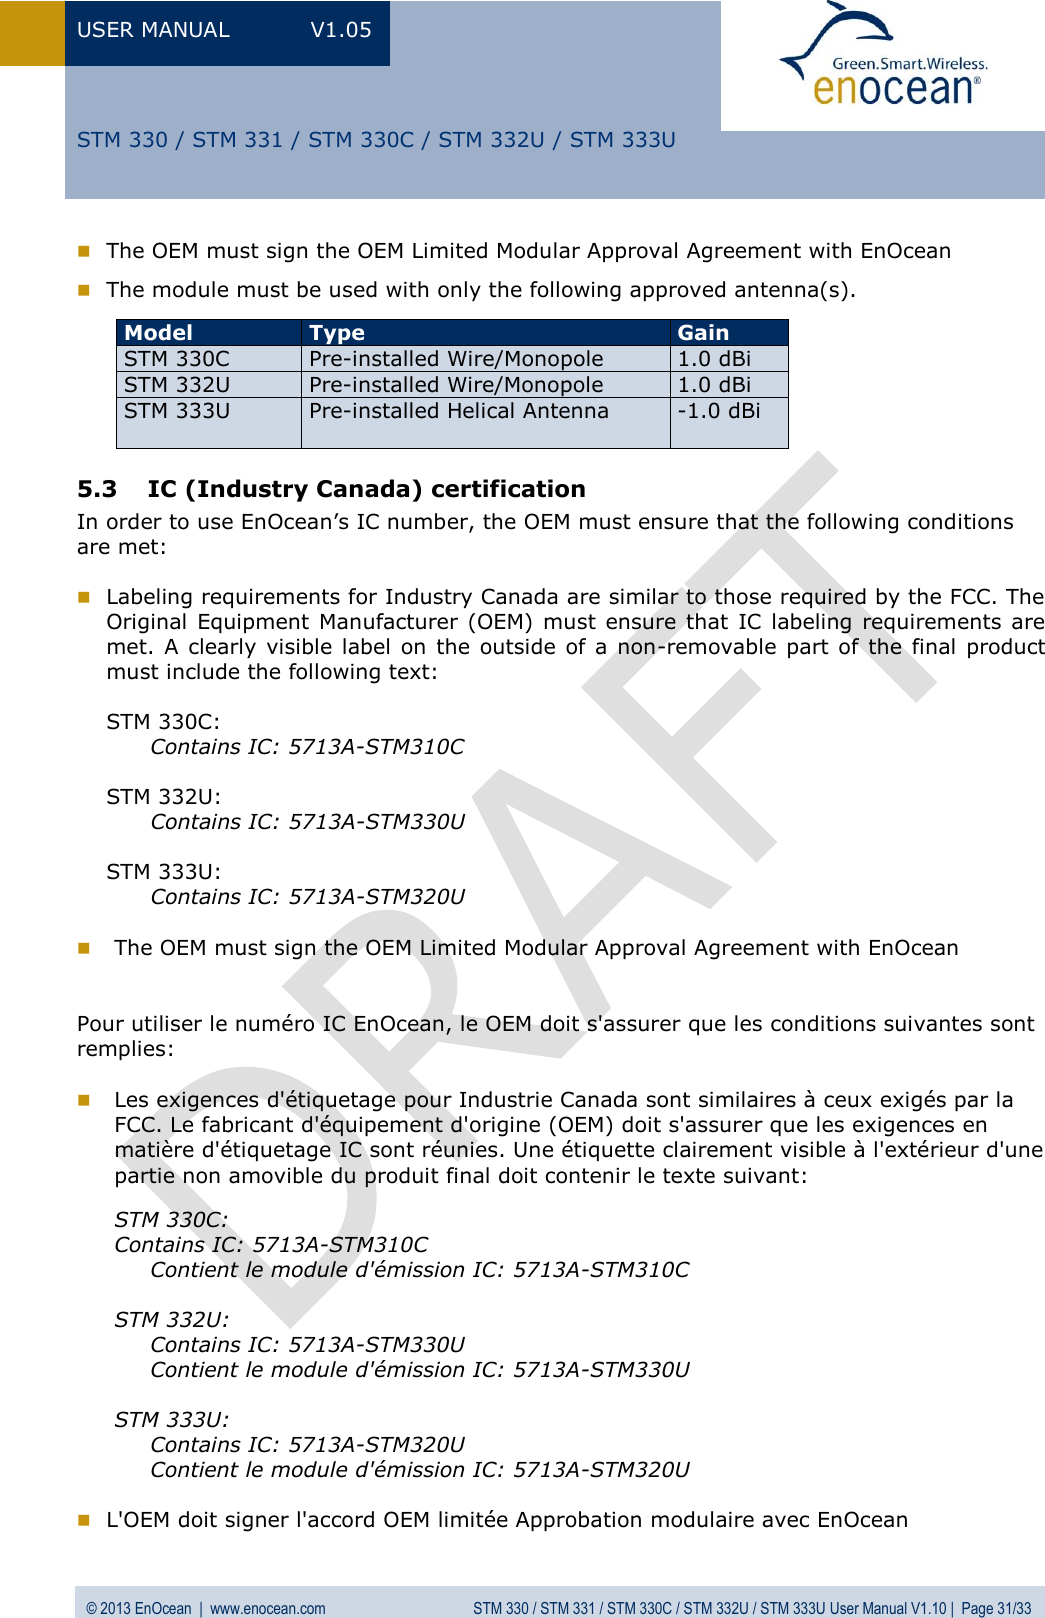 USER MANUAL  V1.05  © 2013 EnOcean  |  www.enocean.com  STM 330 / STM 331 / STM 330C / STM 332U / STM 333U User Manual V1.10 |  Page 31/33   STM 330 / STM 331 / STM 330C / STM 332U / STM 333U  The OEM must sign the OEM Limited Modular Approval Agreement with EnOcean   The module must be used with only the following approved antenna(s).       5.3 IC (Industry Canada) certification In order to use EnOcean’s IC number, the OEM must ensure that the following conditions are met:   Labeling requirements for Industry Canada are similar to those required by the FCC. The Original Equipment Manufacturer  (OEM) must  ensure that  IC labeling  requirements  are met. A  clearly  visible label  on the outside of a non-removable  part of the final product must include the following text:  STM 330C: Contains IC: 5713A-STM310C  STM 332U: Contains IC: 5713A-STM330U  STM 333U: Contains IC: 5713A-STM320U   The OEM must sign the OEM Limited Modular Approval Agreement with EnOcean   Pour utiliser le numéro IC EnOcean, le OEM doit s&apos;assurer que les conditions suivantes sont remplies:   Les exigences d&apos;étiquetage pour Industrie Canada sont similaires à ceux exigés par la FCC. Le fabricant d&apos;équipement d&apos;origine (OEM) doit s&apos;assurer que les exigences en  matière d&apos;étiquetage IC sont réunies. Une étiquette clairement visible à l&apos;extérieur d&apos;une partie non amovible du produit final doit contenir le texte suivant:  STM 330C: Contains IC: 5713A-STM310C    Contient le module d&apos;émission IC: 5713A-STM310C  STM 332U:   Contains IC: 5713A-STM330U    Contient le module d&apos;émission IC: 5713A-STM330U  STM 333U:   Contains IC: 5713A-STM320U    Contient le module d&apos;émission IC: 5713A-STM320U   L&apos;OEM doit signer l&apos;accord OEM limitée Approbation modulaire avec EnOcean Model Type Gain STM 330C Pre-installed Wire/Monopole 1.0 dBi STM 332U Pre-installed Wire/Monopole 1.0 dBi STM 333U Pre-installed Helical Antenna -1.0 dBi 